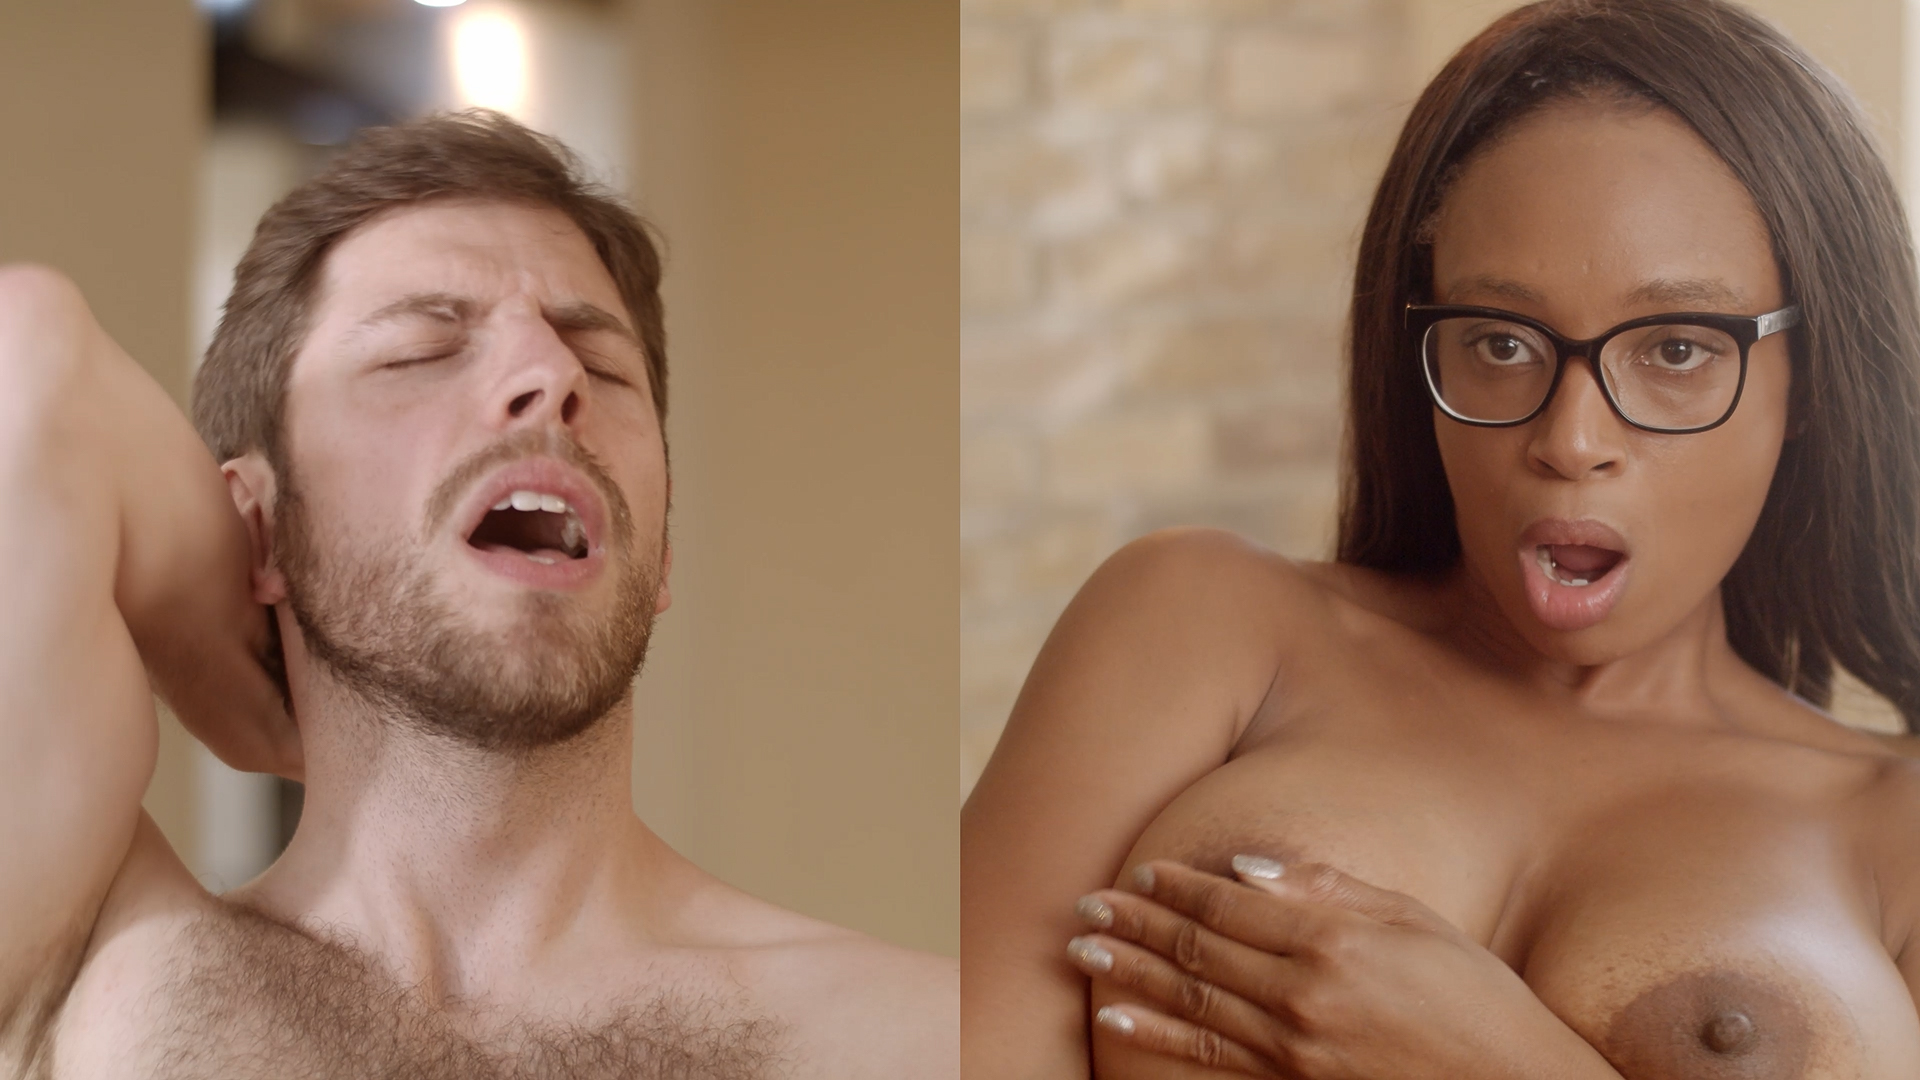 Split-screen or Marcus's face eyes closed and mputh open in pleasure with his hand behind his head, and Lola's face watching him muth open in pleasure hand holding her breasts